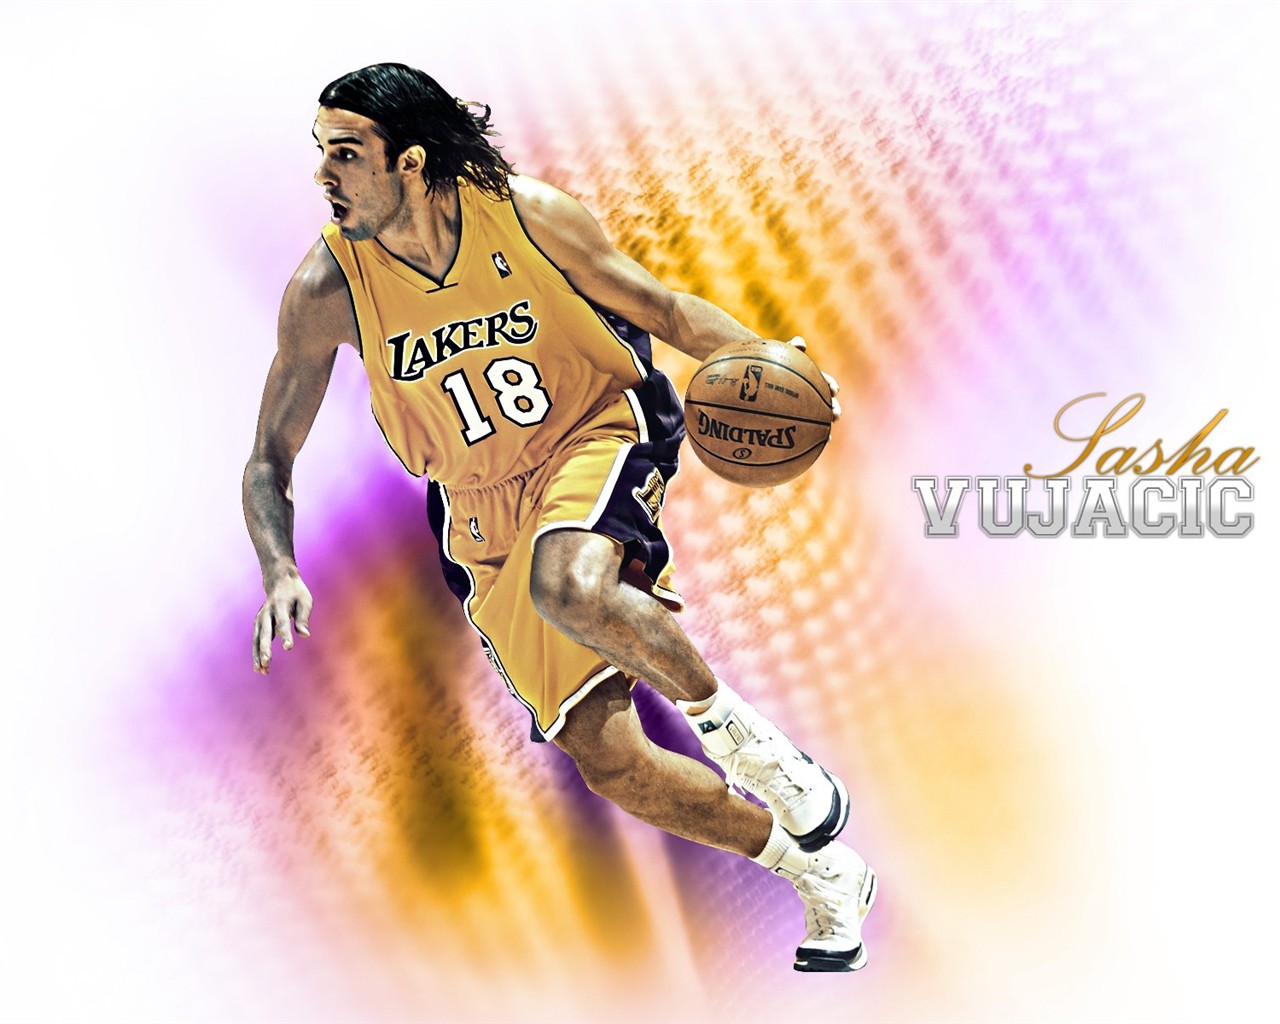 Los Angeles Lakers Wallpaper Oficial #23 - 1280x1024